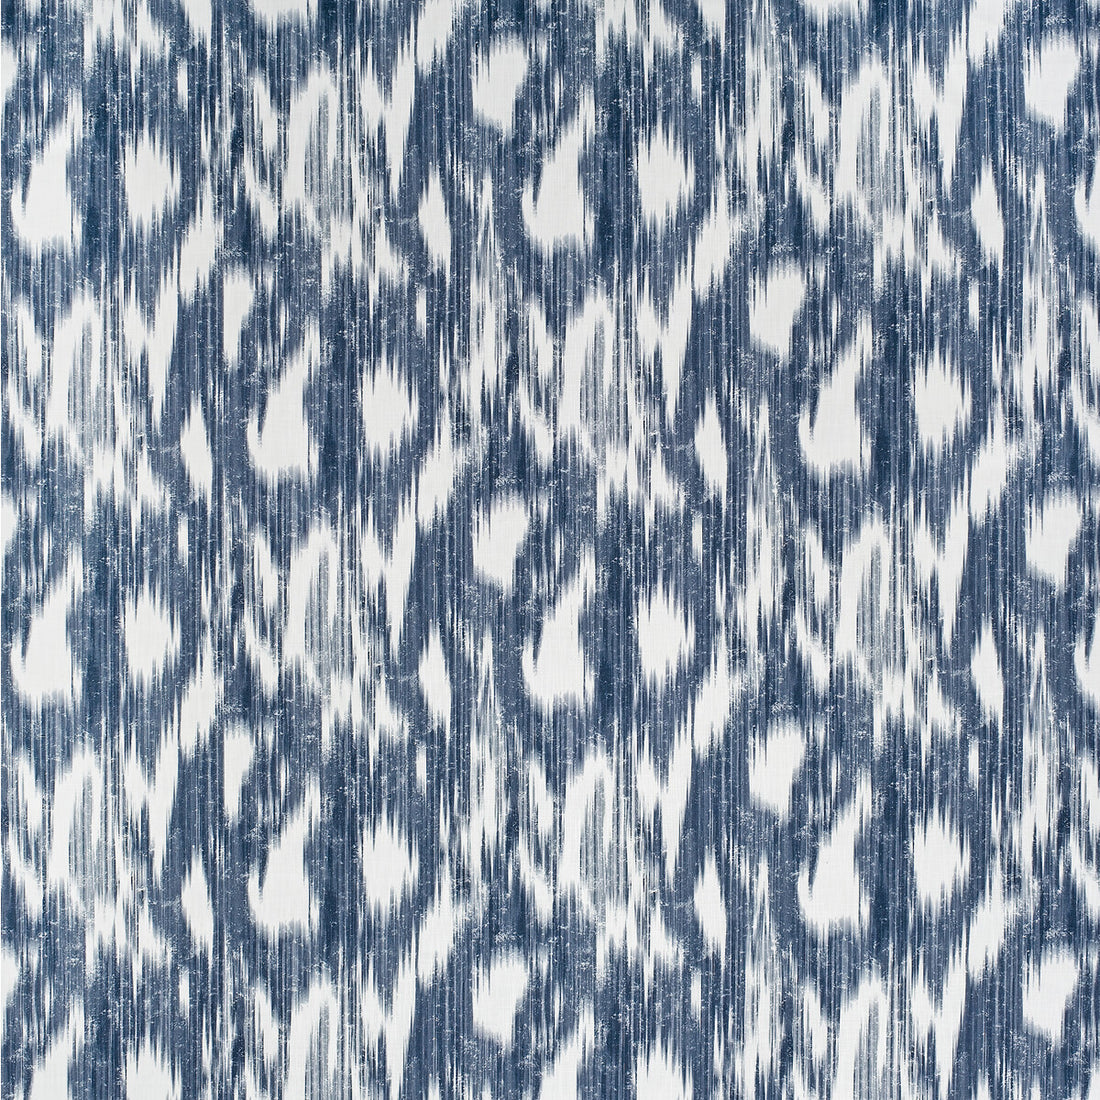 Apulia Outdoor fabric in navy color - pattern AM100385.550.0 - by Kravet Couture in the Andrew Martin Sophie Patterson Outdoor collection